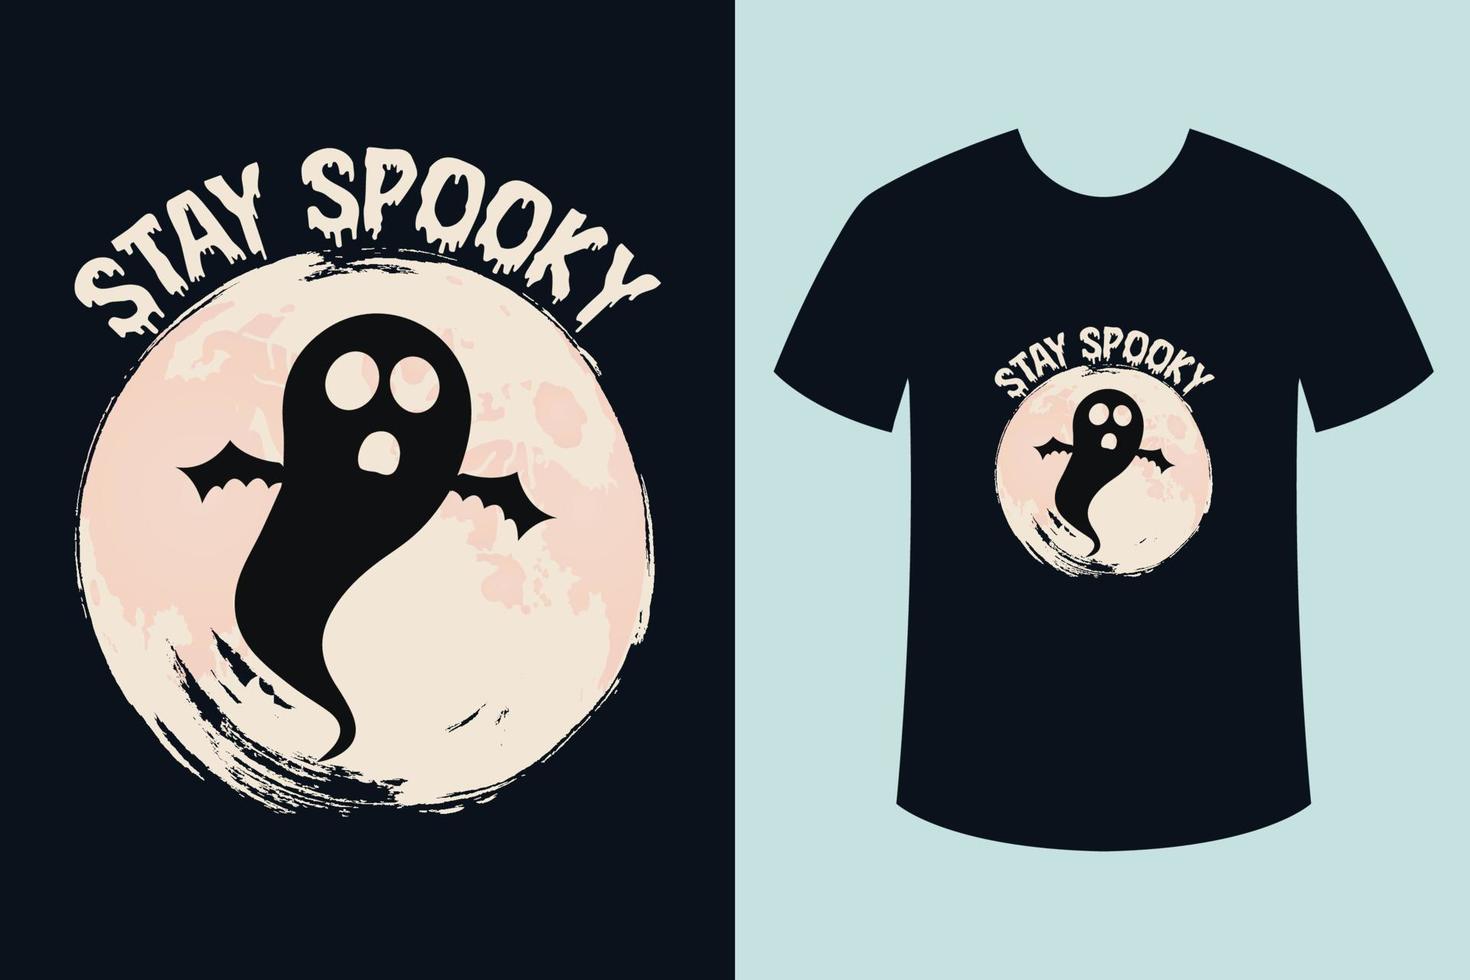 Stay spooky halloween t shirt design with ghost vector